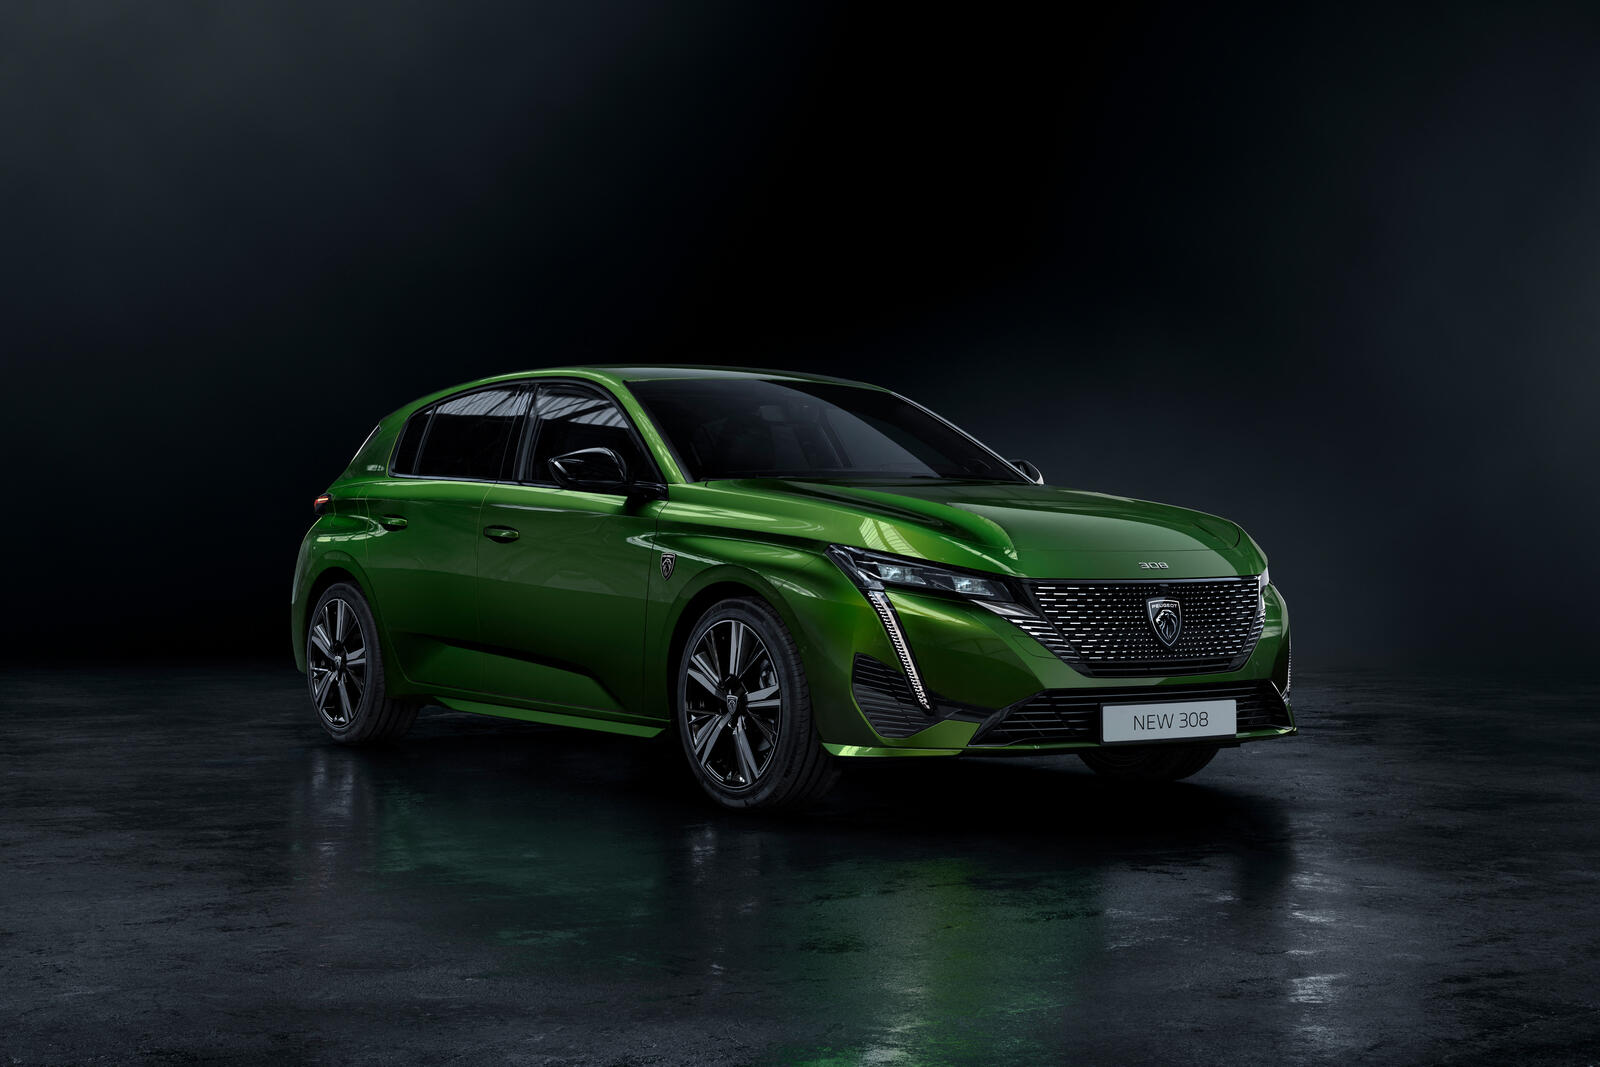 Wallpapers automobile Peugeot green on the desktop